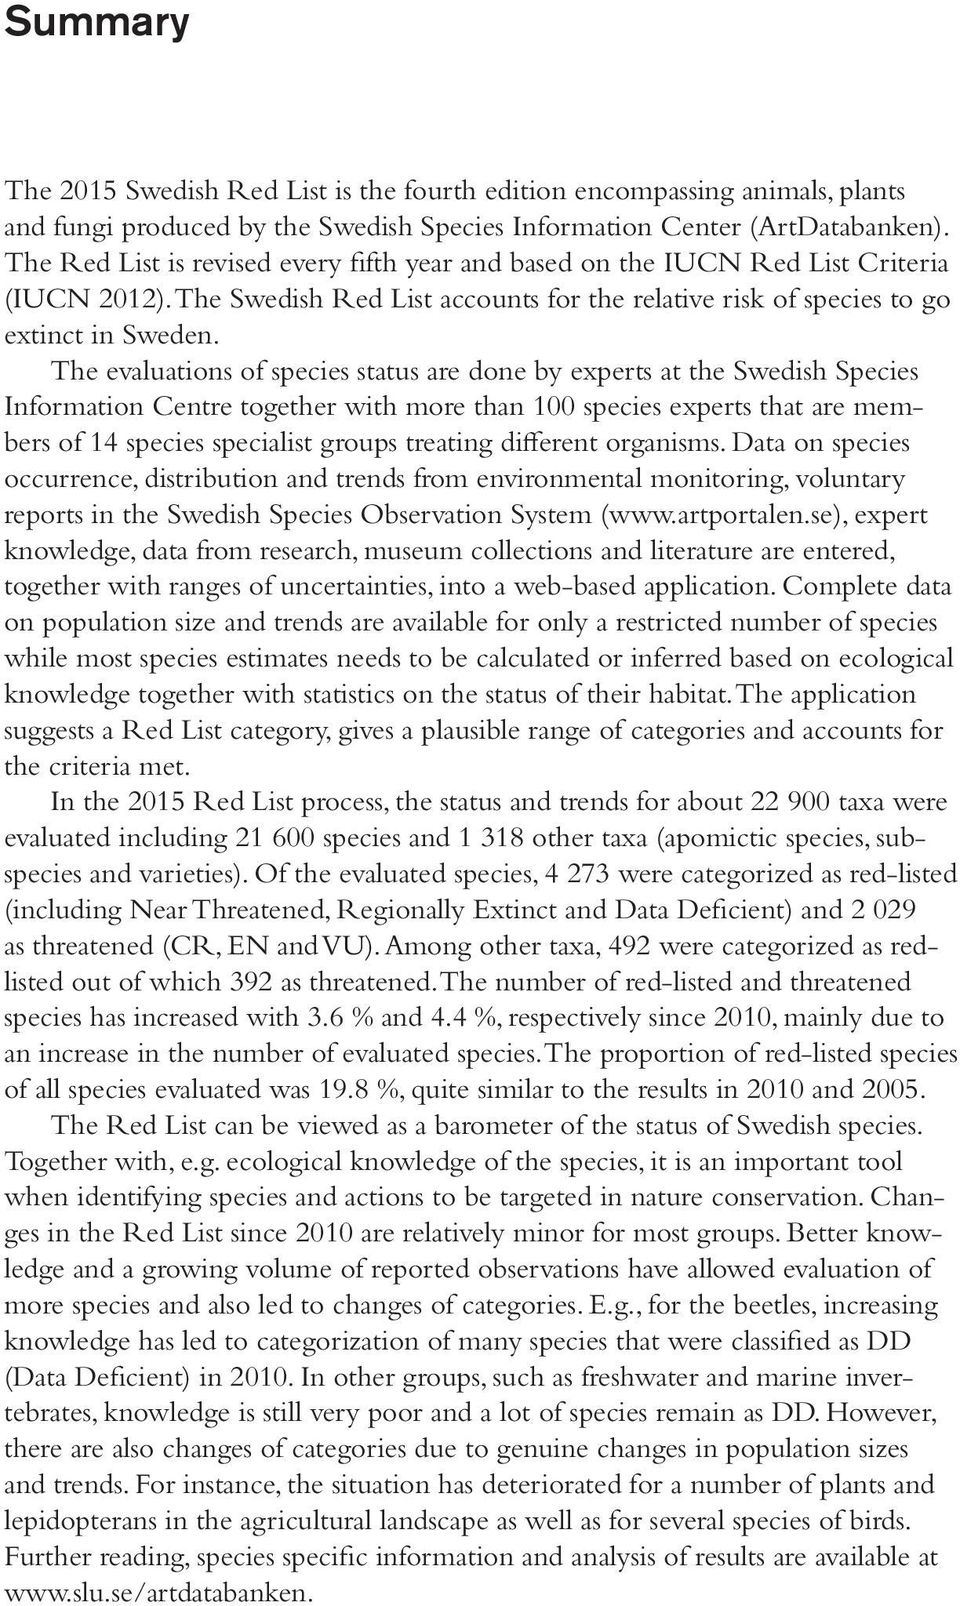 The evaluations of species status are done by experts at the Swedish Species Information Centre together with more than 100 species experts that are members of 14 species specialist groups treating